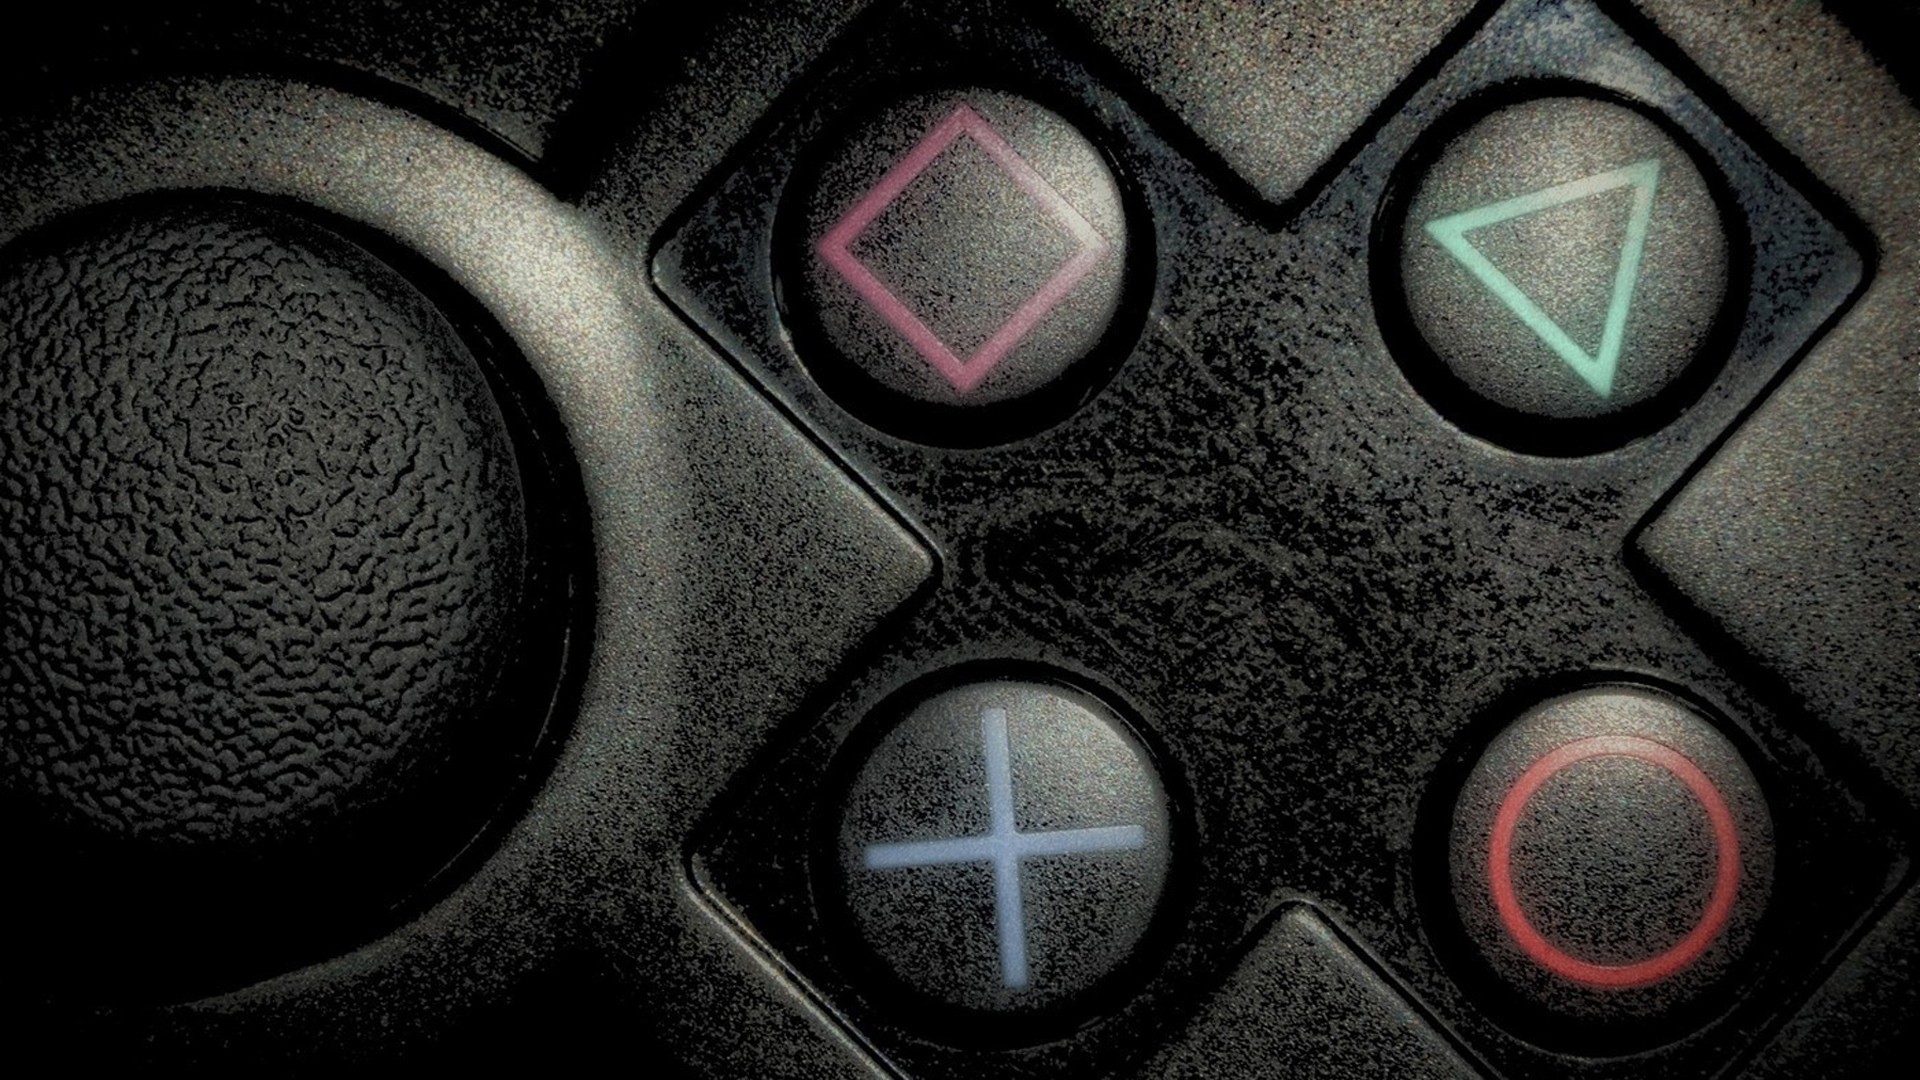 video, Games, Playstation, Buttons, Controllers, Playstation Wallpaper